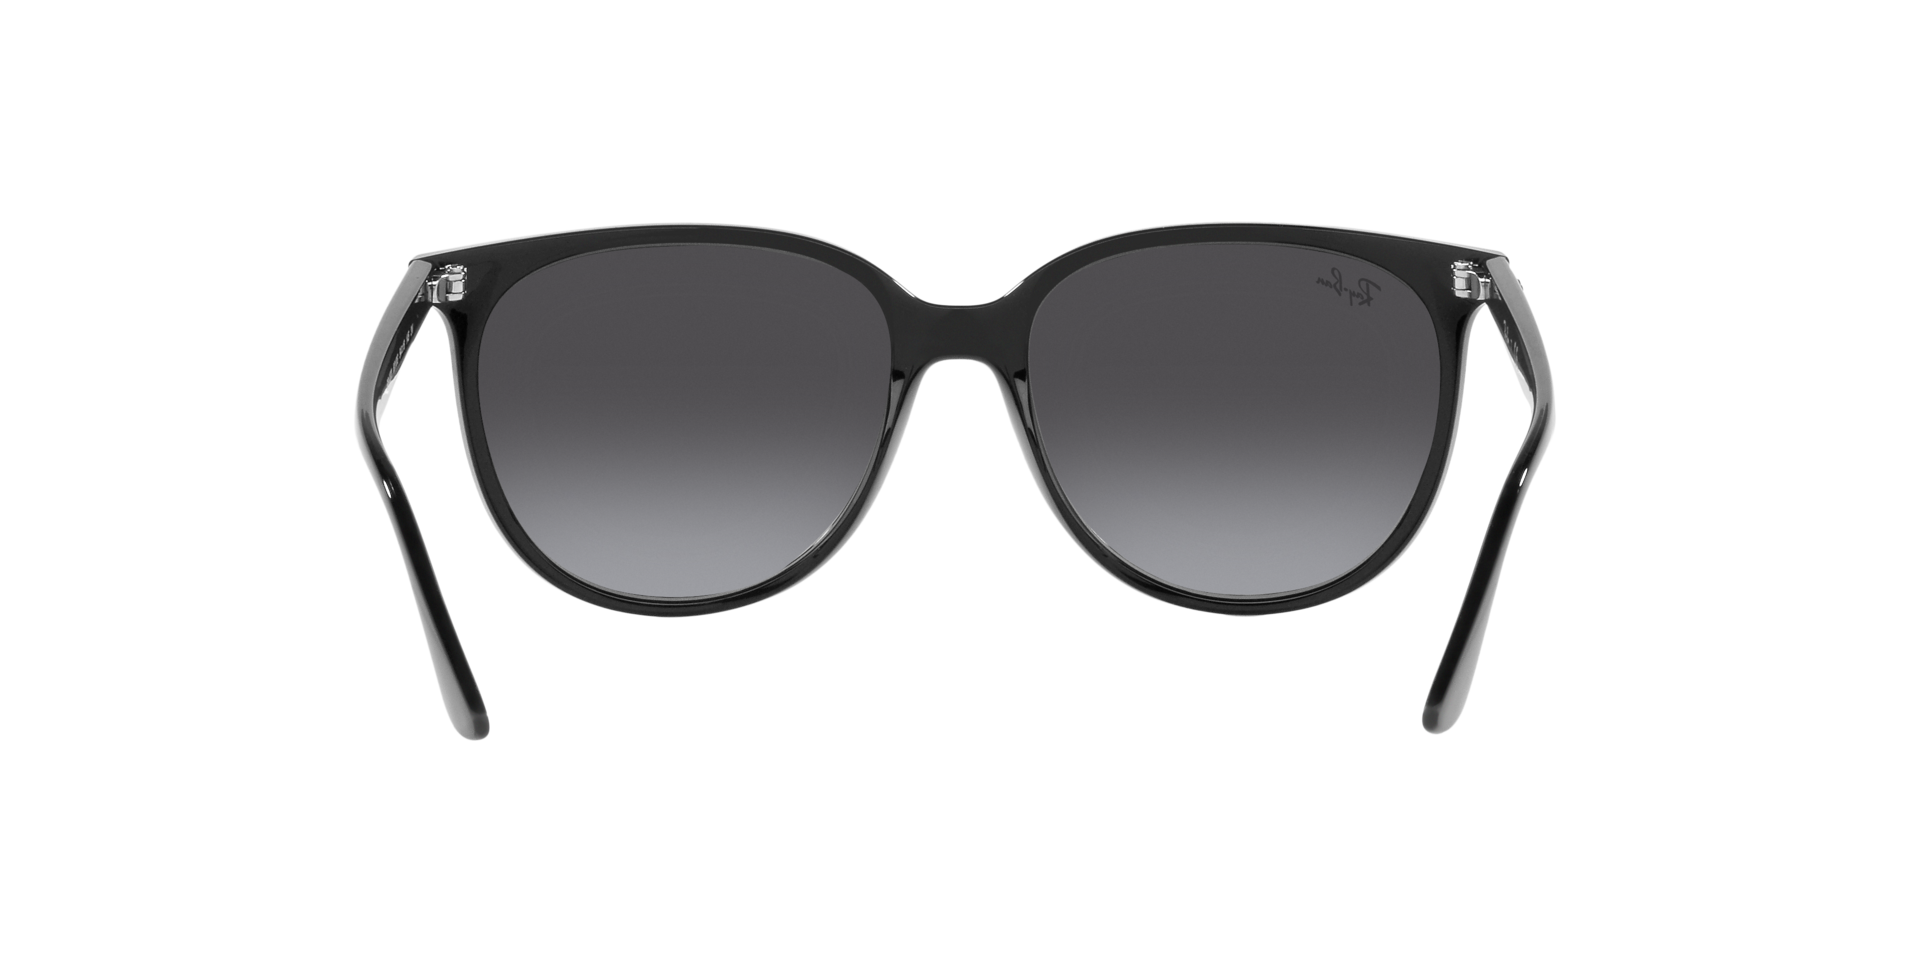 Buy Ray-Ban Rb4378 Sunglasses Online.